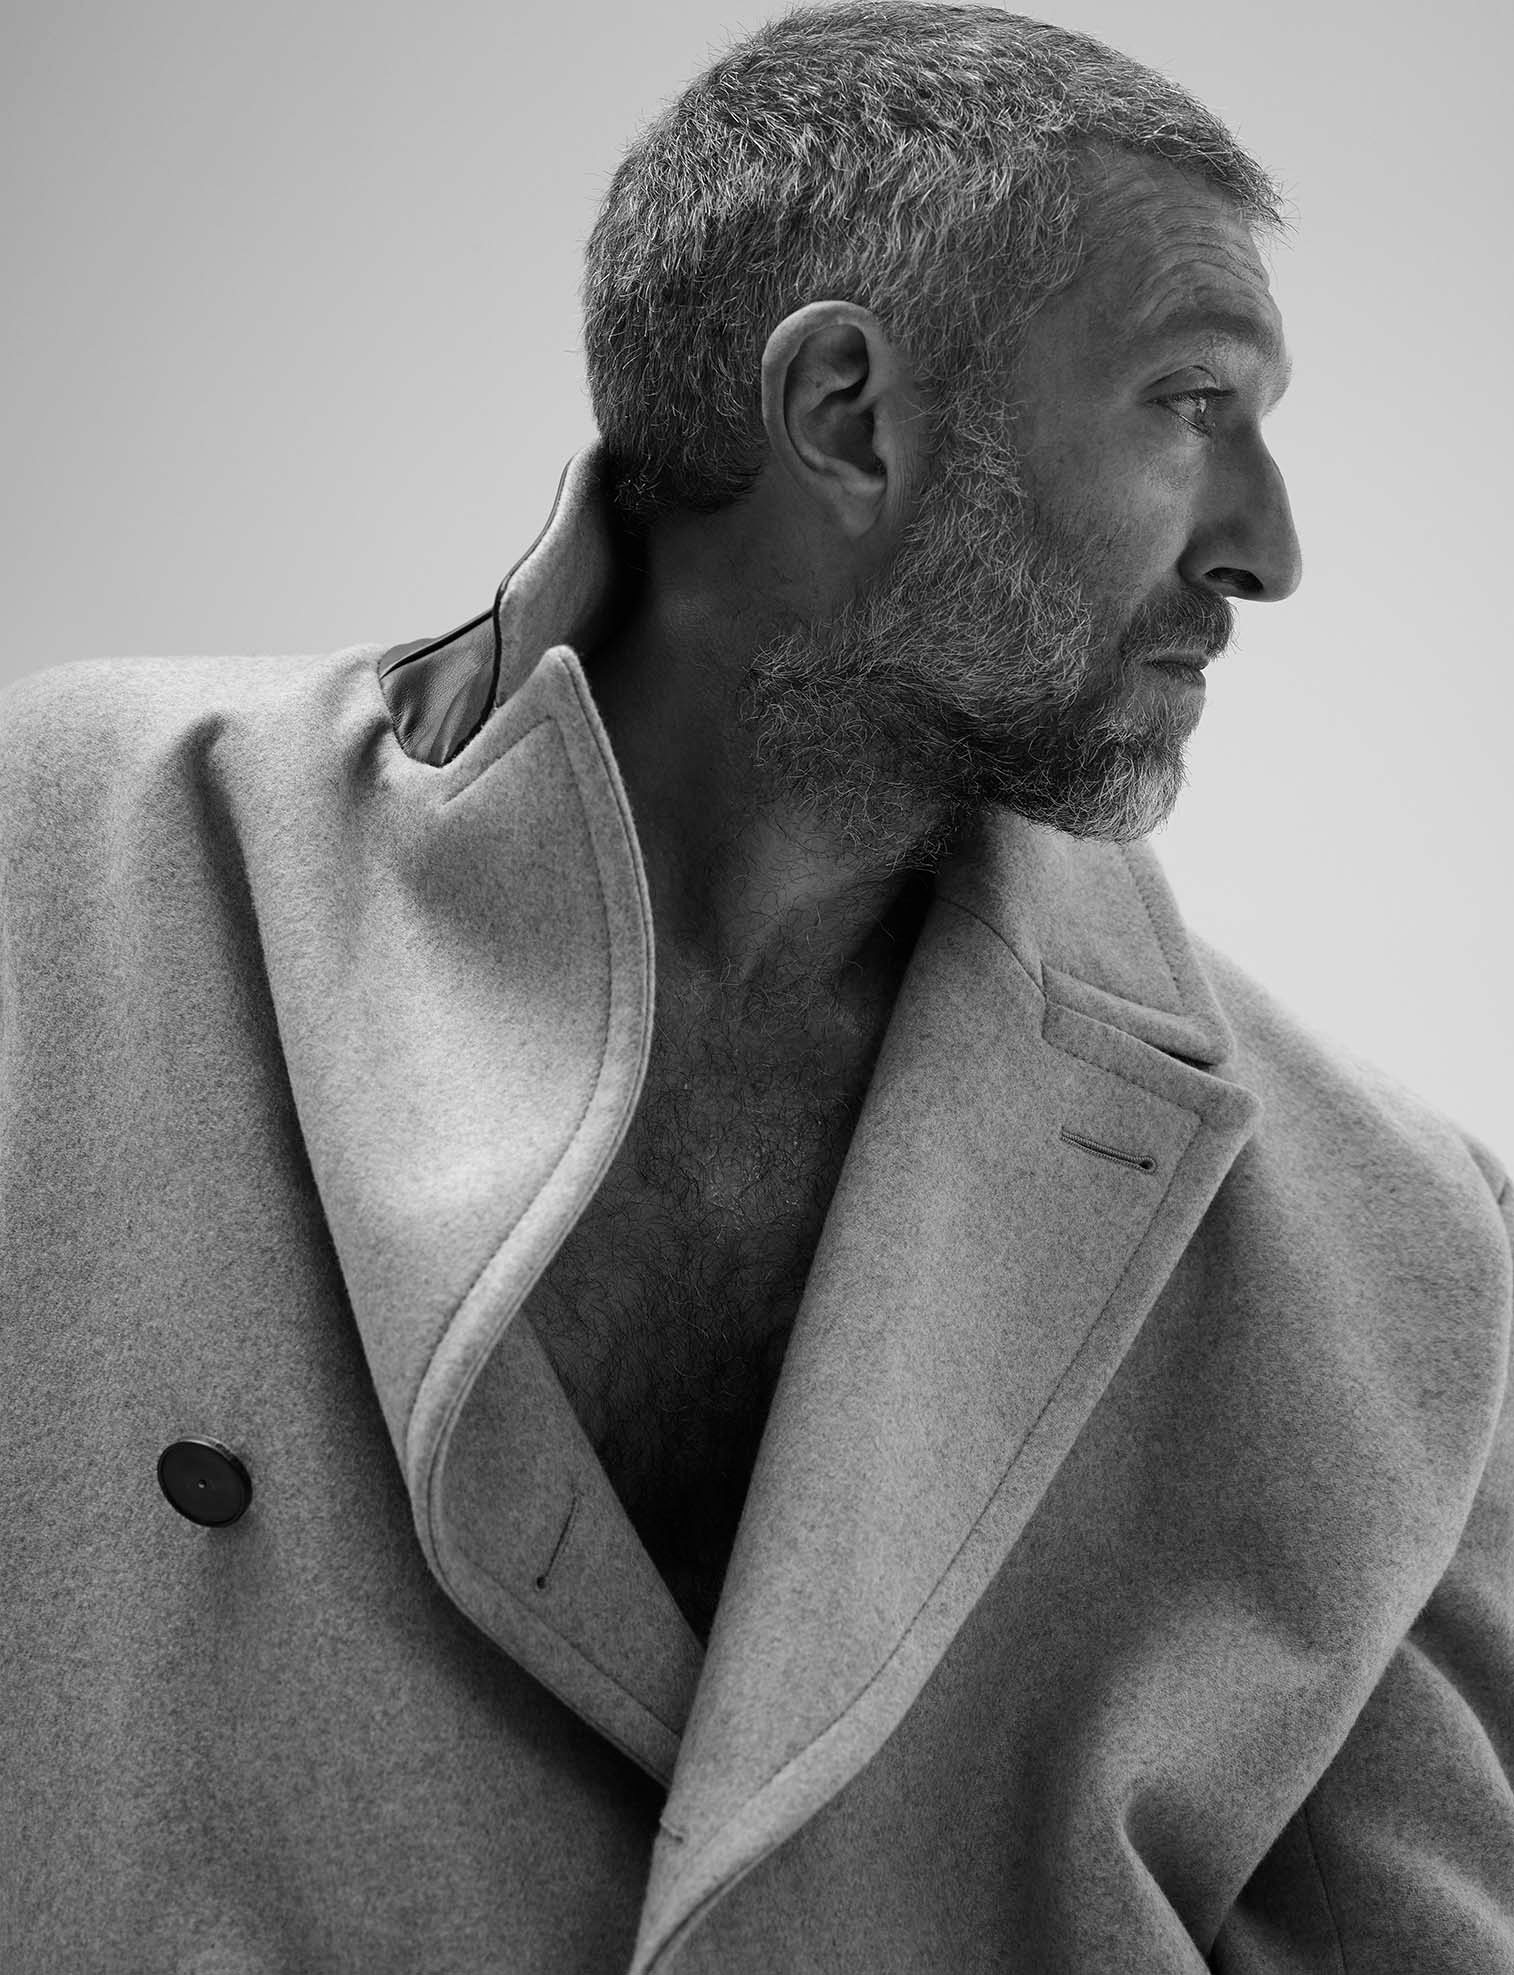 Vincent Cassel by Jean-Baptiste Mondino. Photograph published in Numéro #186 in 2017. Exclusive signed print for the "Mondino Numéro 20 ans" exhibition at the Studio des Acacias in Paris. Inkjet print on Rauch Dos Bleu paper.